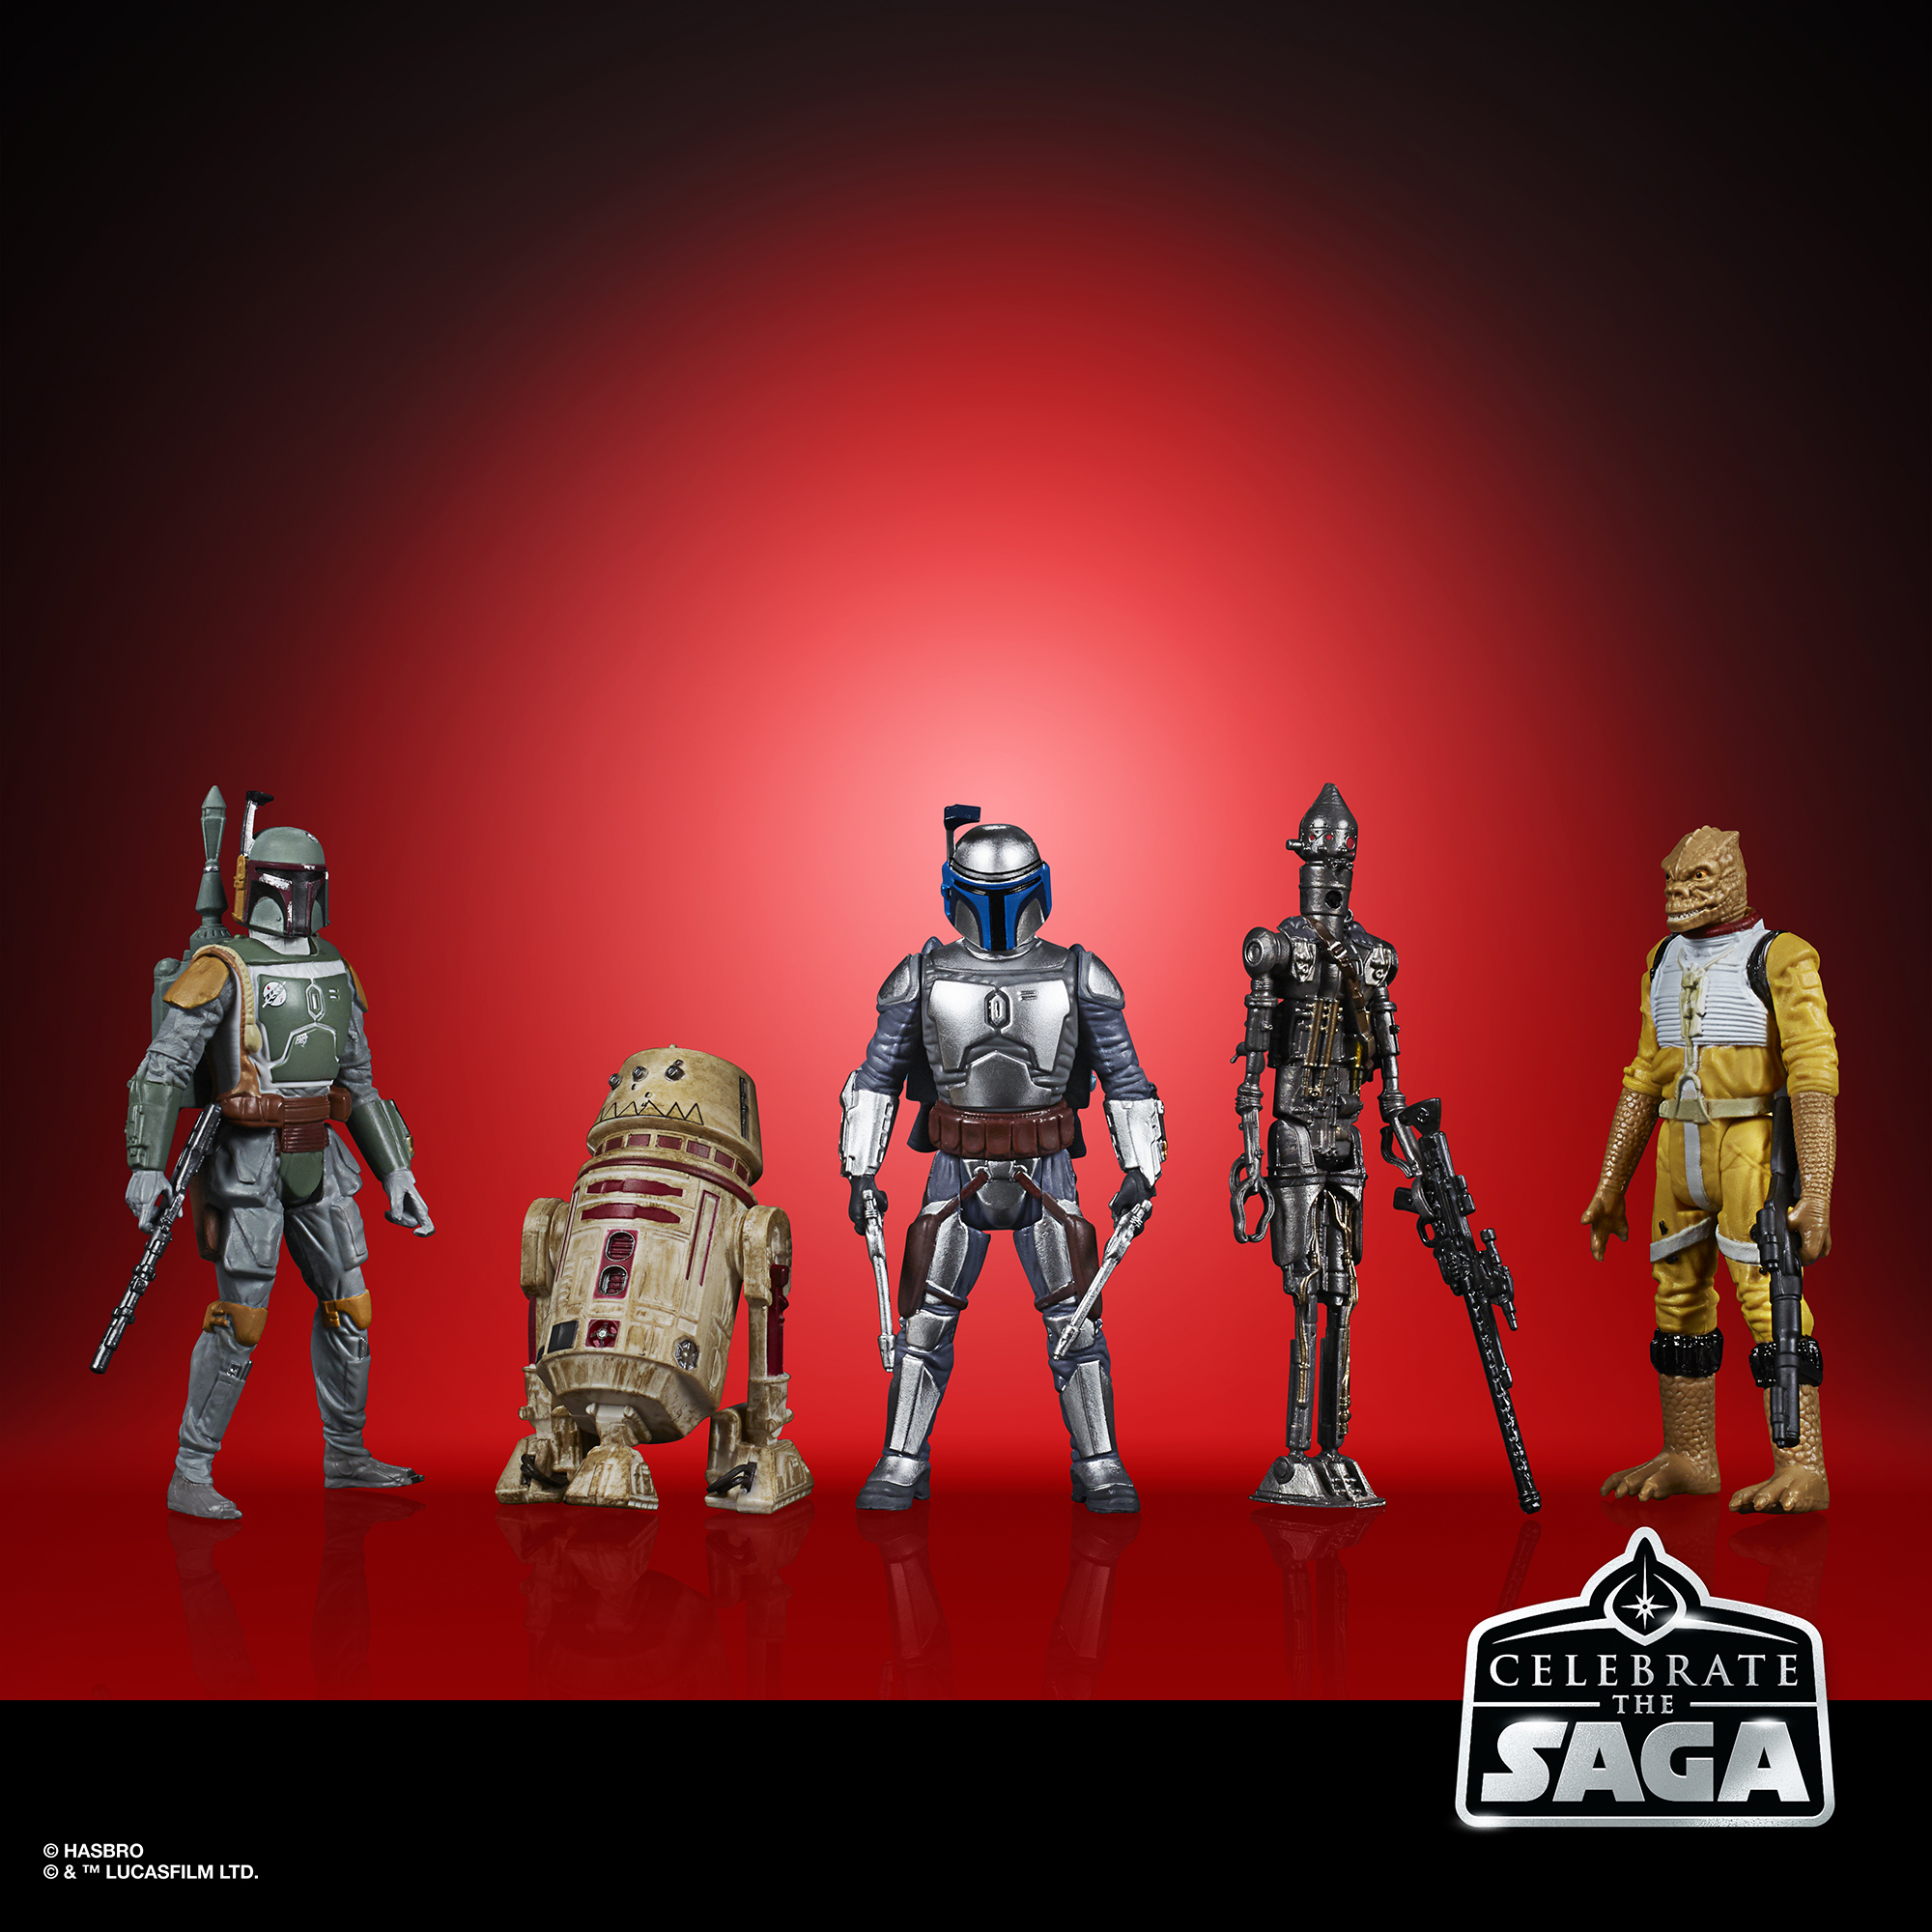 Star Wars Celebrate the Saga Toys Bounty Hunters Action Figure Set, Accessories - image 5 of 7